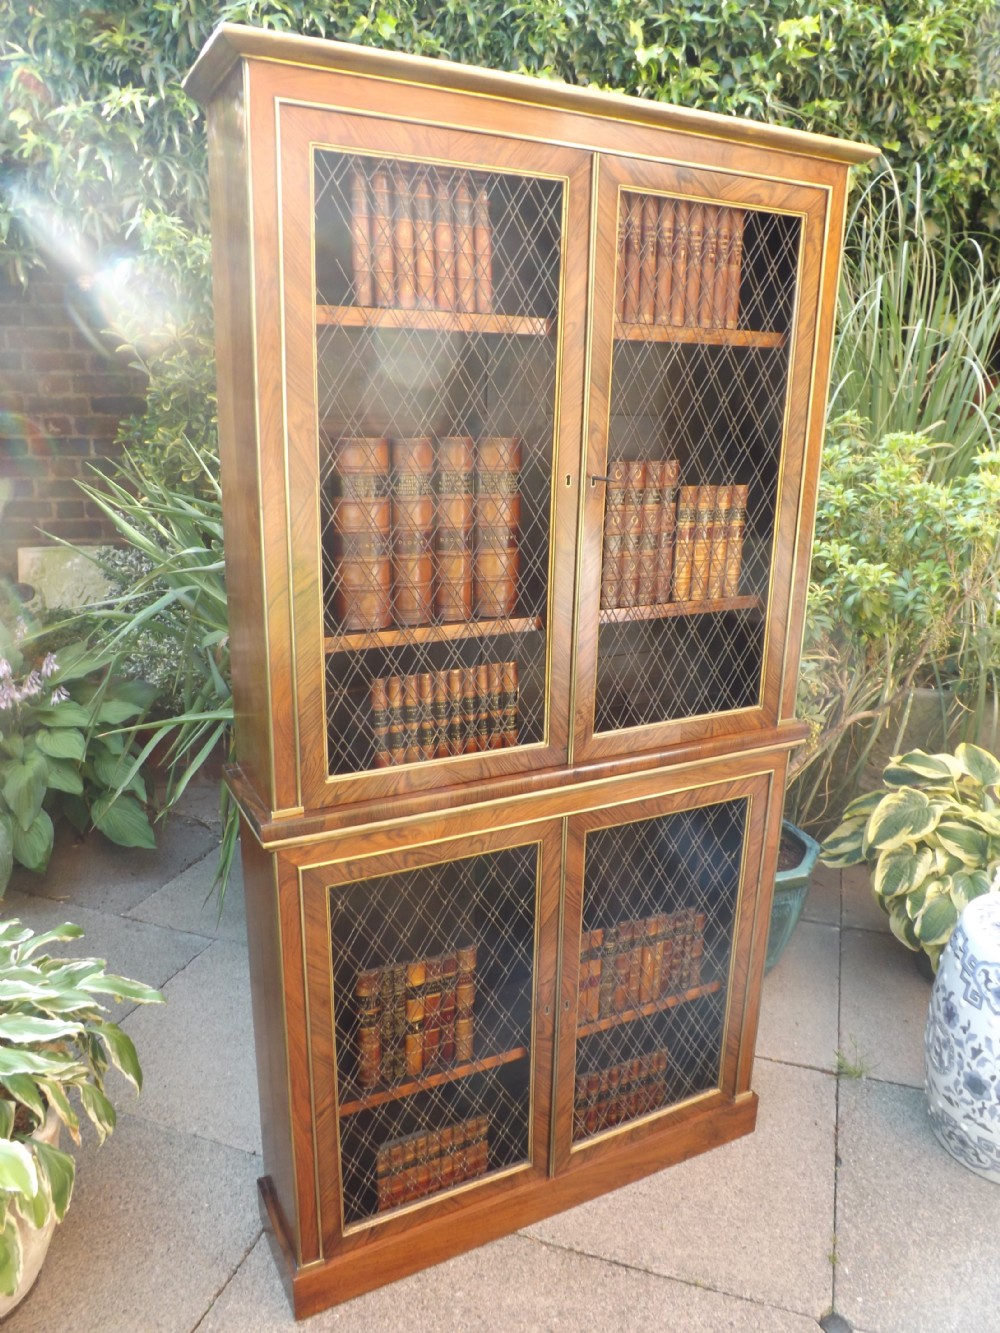 early c19th regency period rosewood gilt brassmounted and parcelgilt 2part bookcase